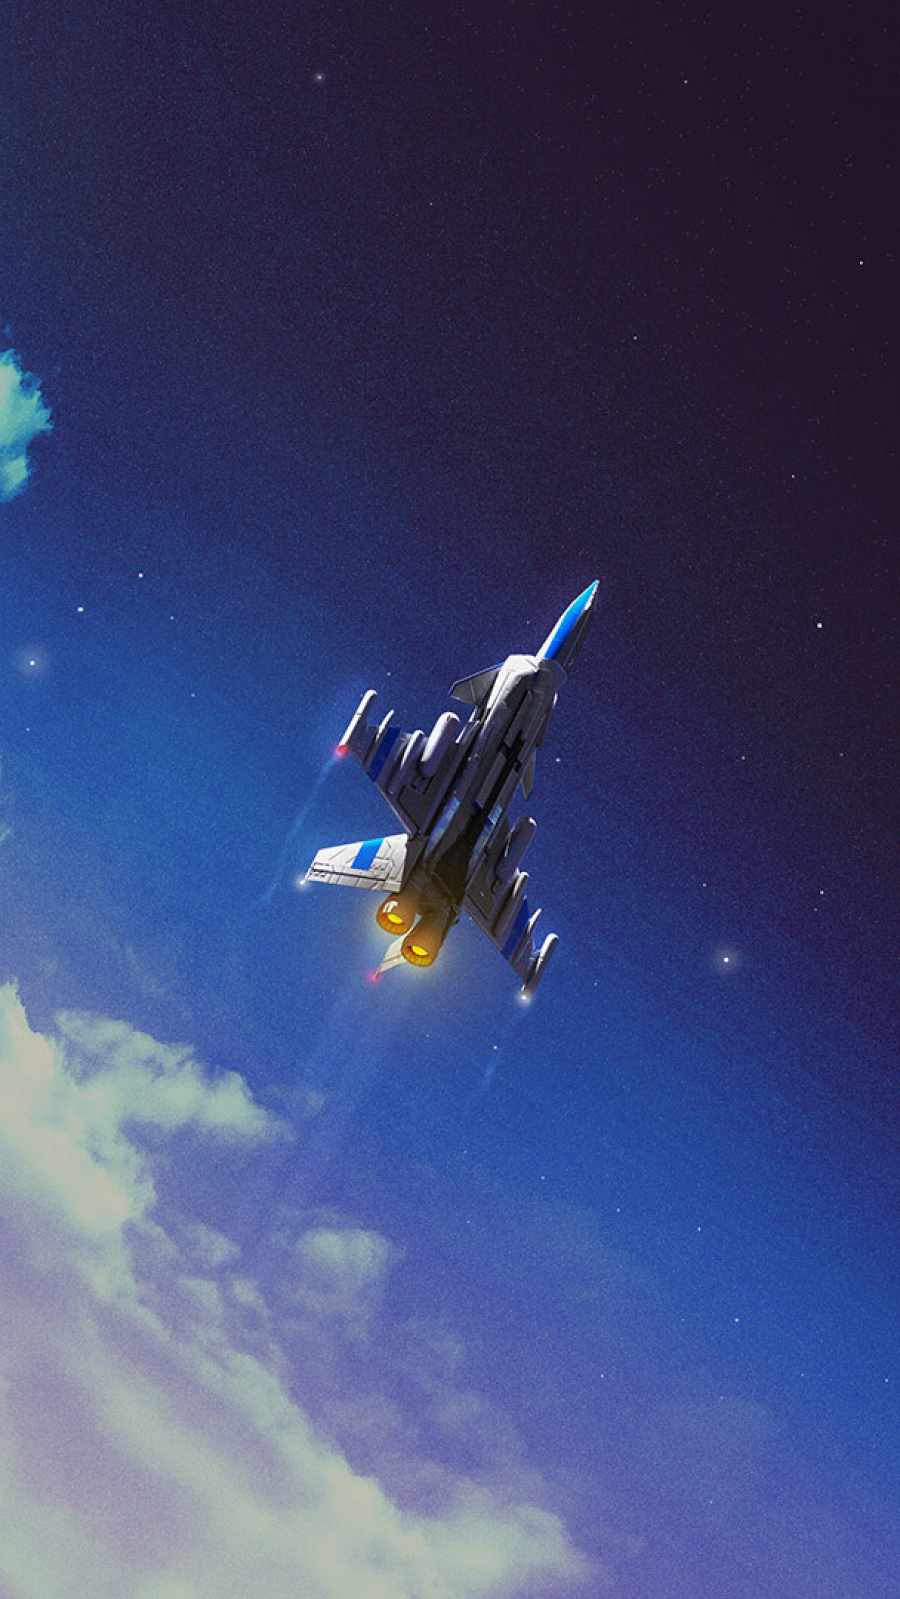 Fighter Jet going to Space iPhone Wallpaper